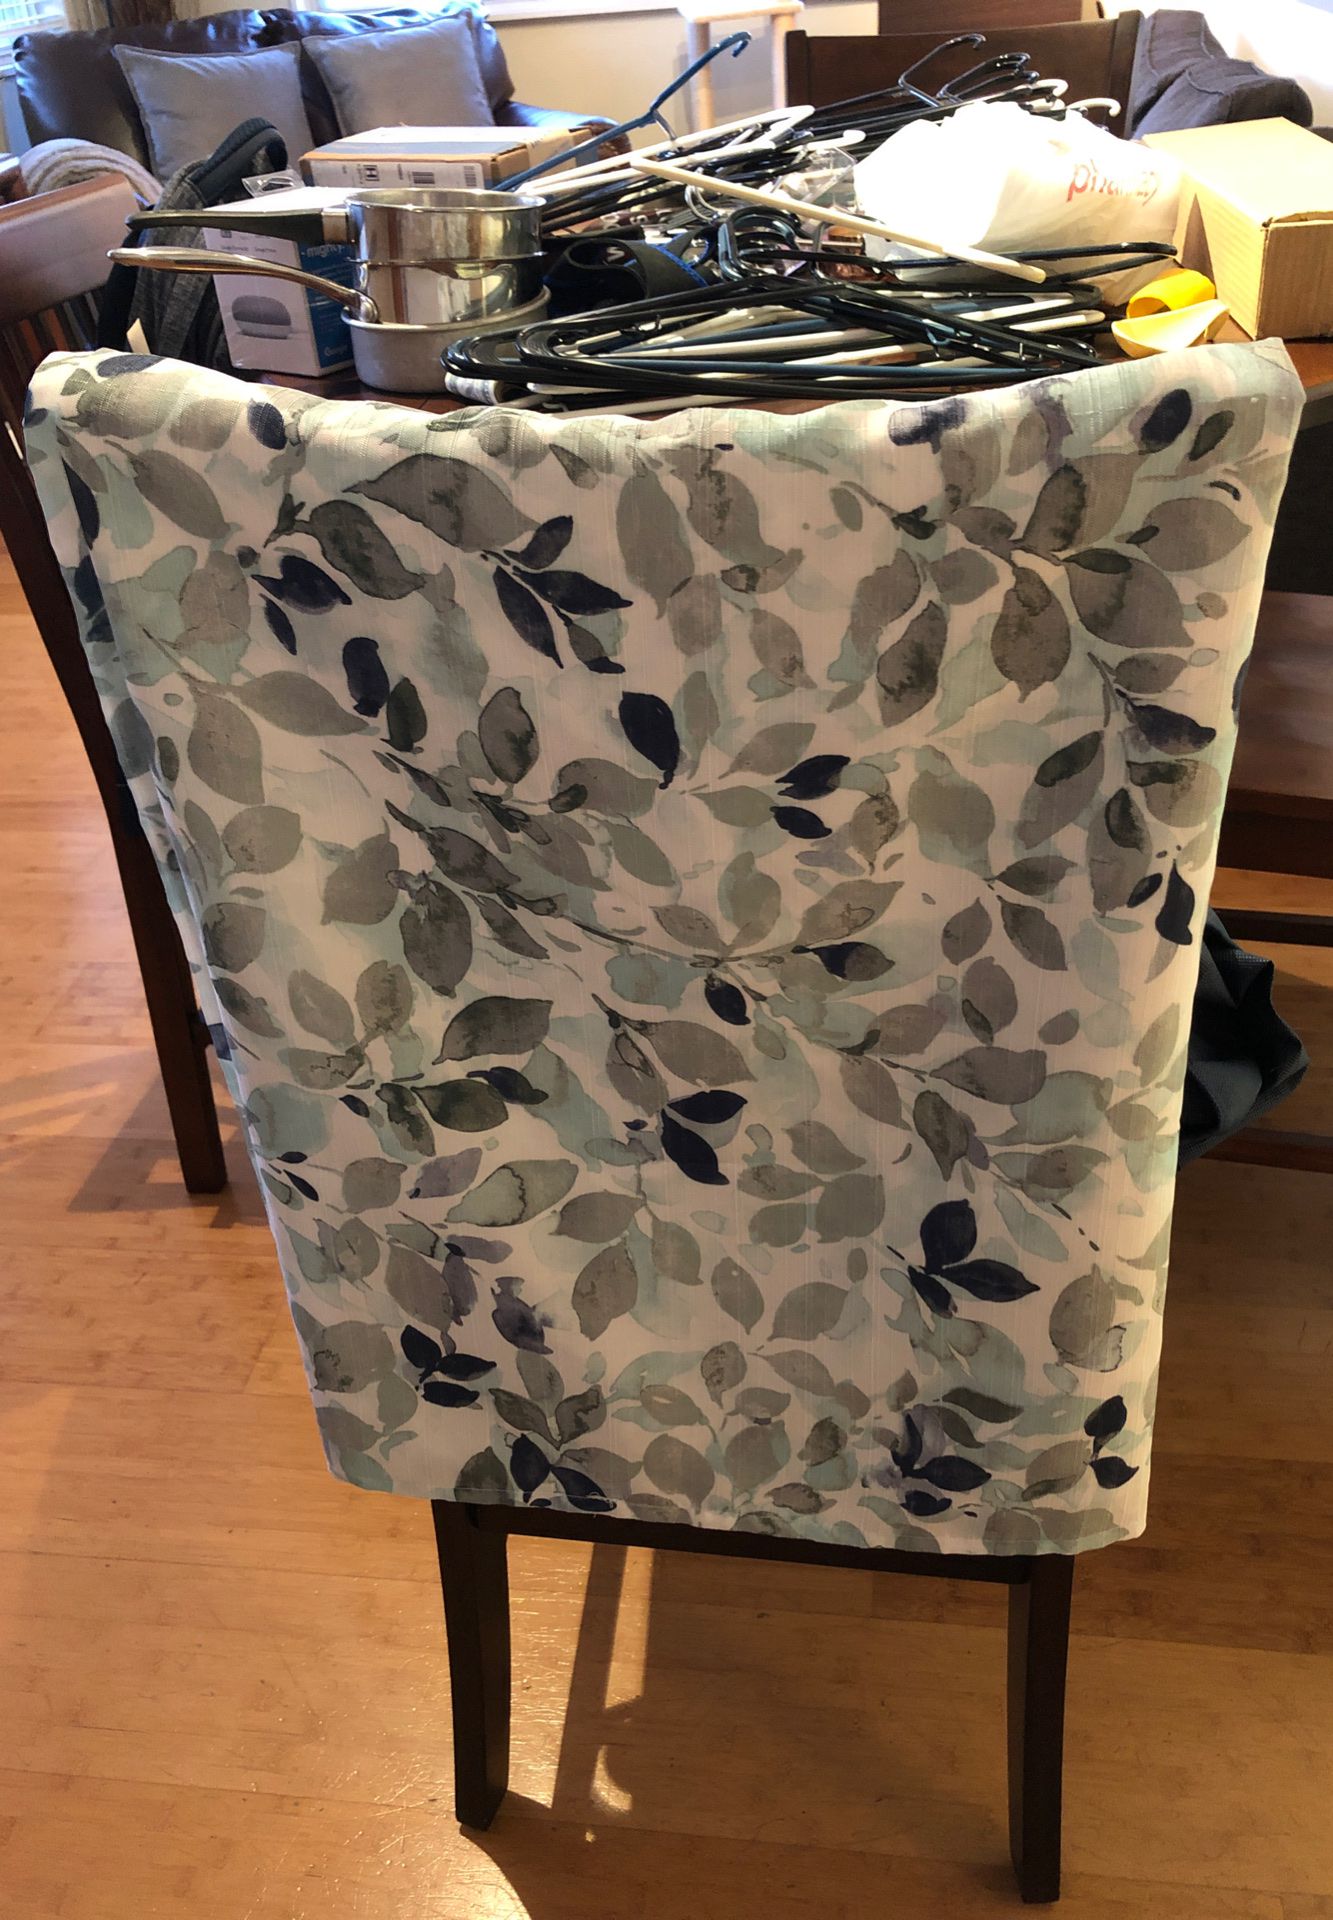 Leaf Fabric Shower Curtain in great condition